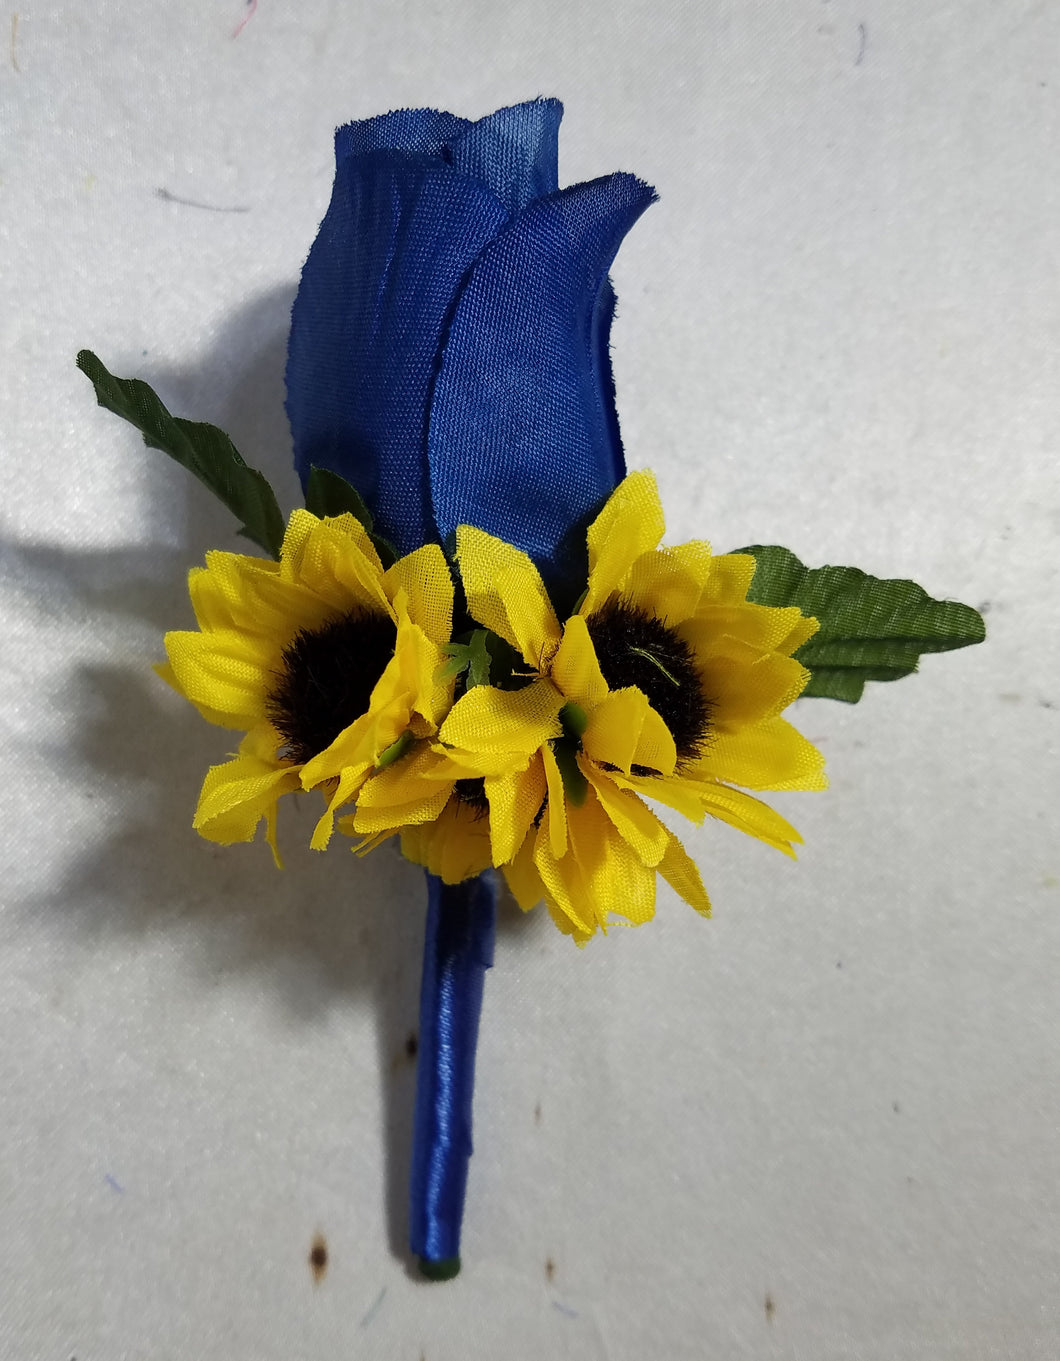 Royal Blue Rose Cala Lily Sunflower Bridal Wedding Bouquet Accessories